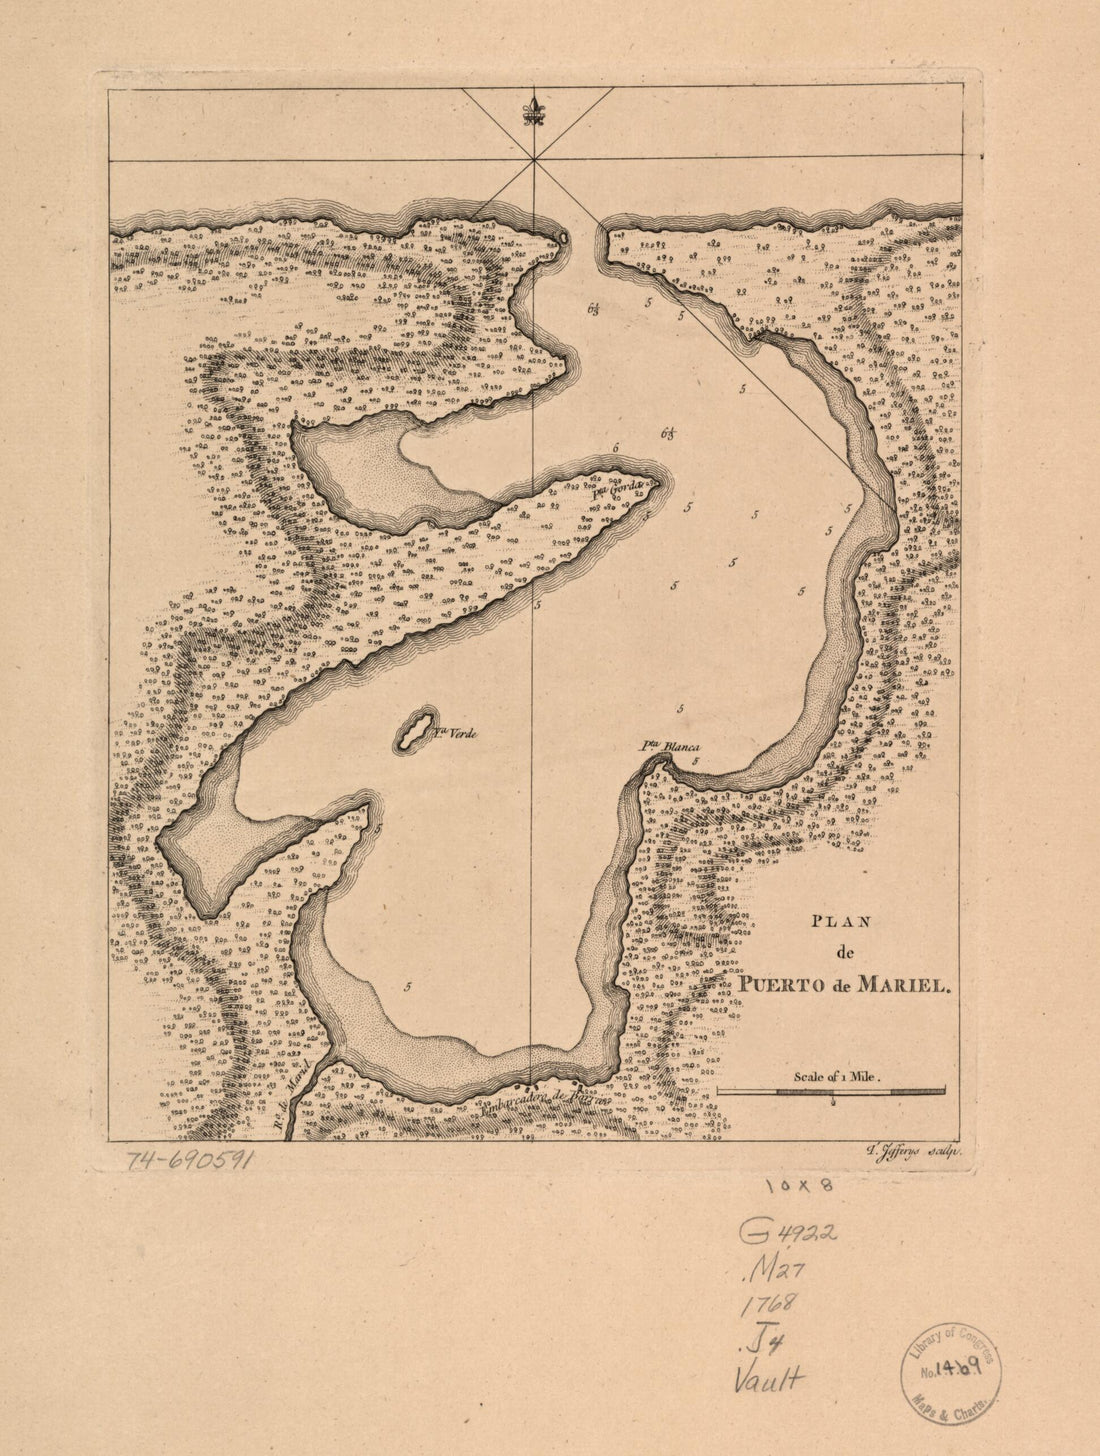 This old map of Plan De Puerto De Mariel from 1768 was created by Thomas Jefferys in 1768